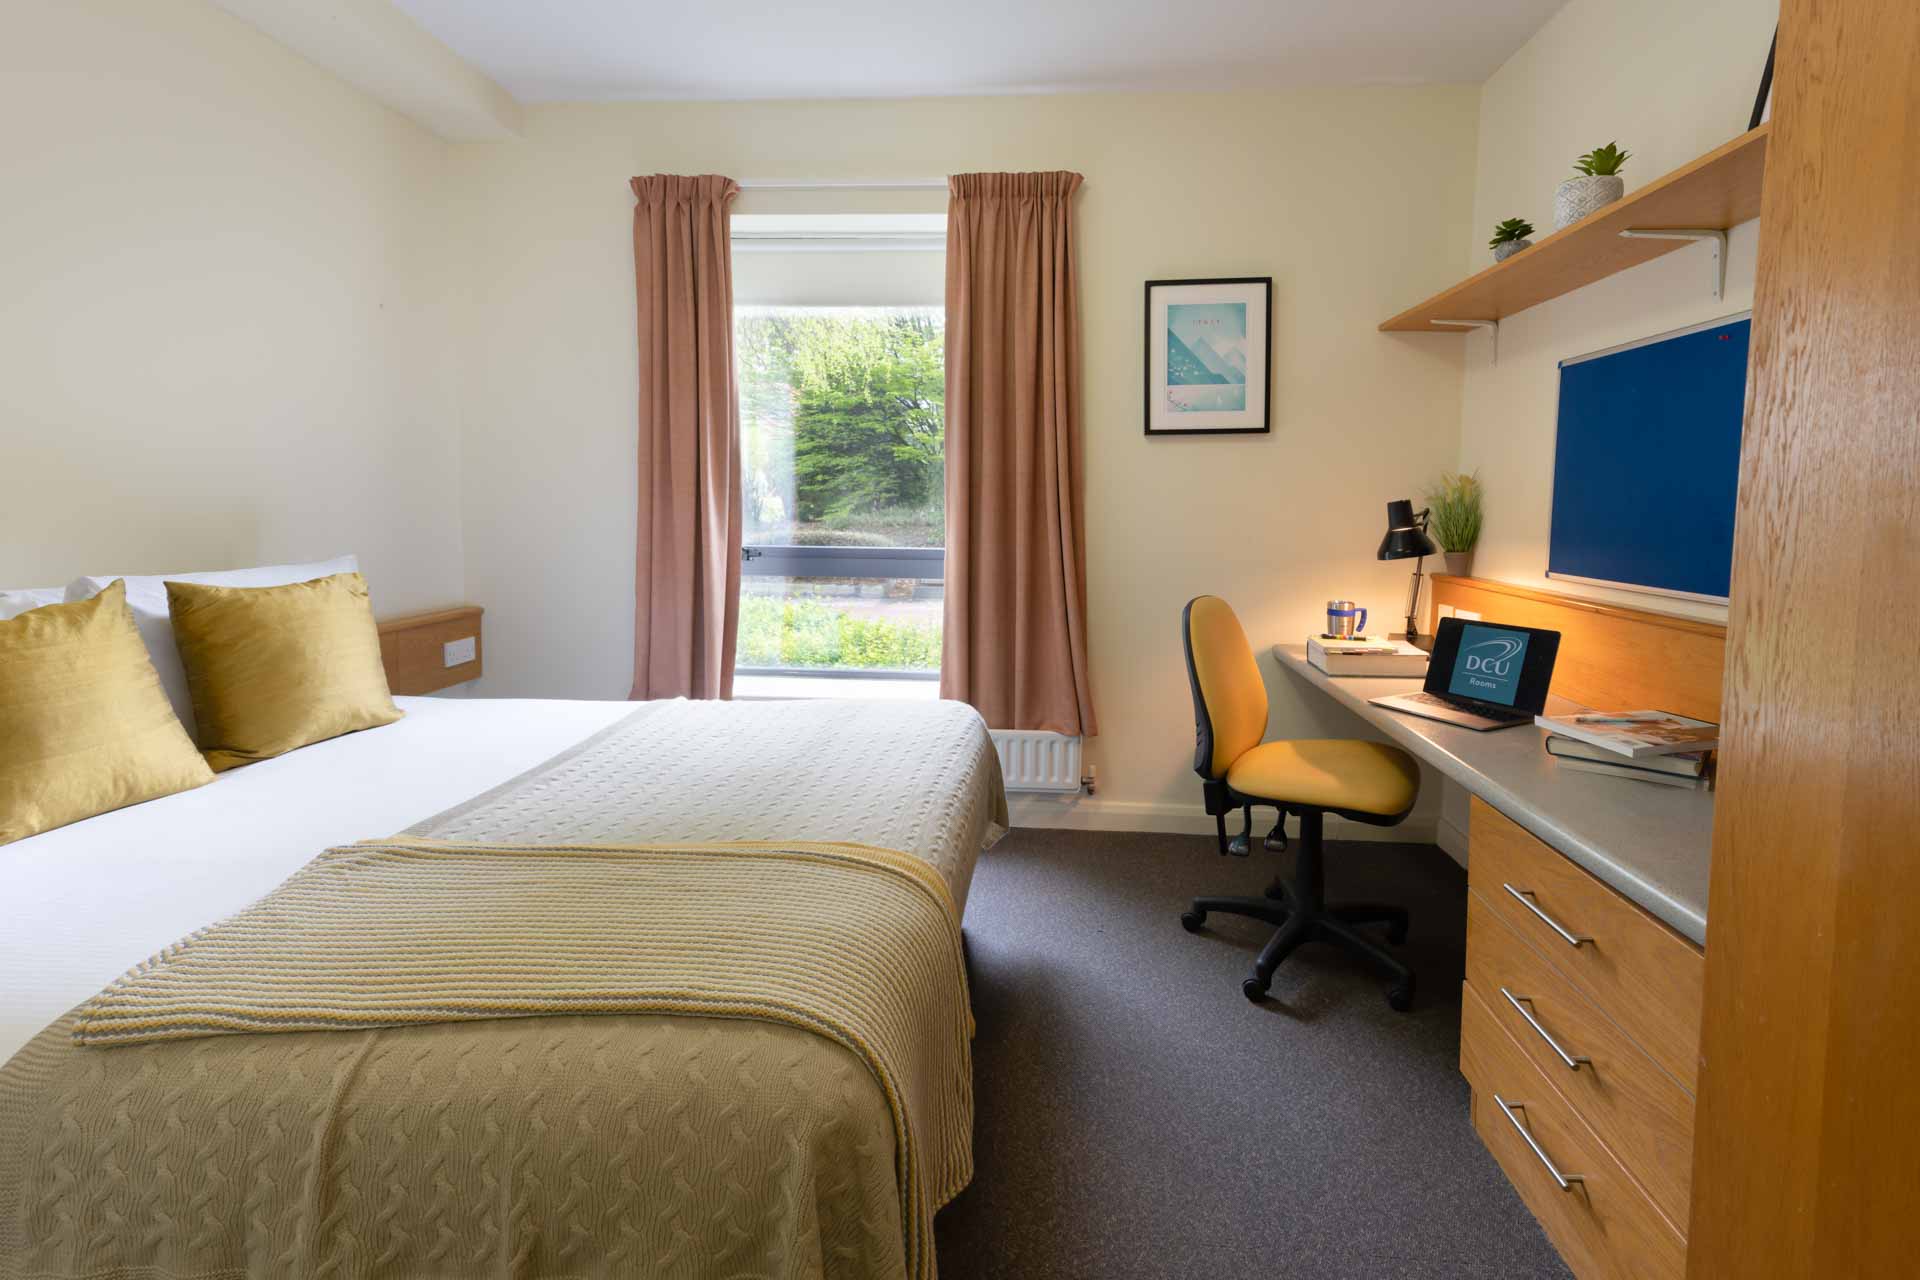 DCU Glasnevin Campus Student Accommodation